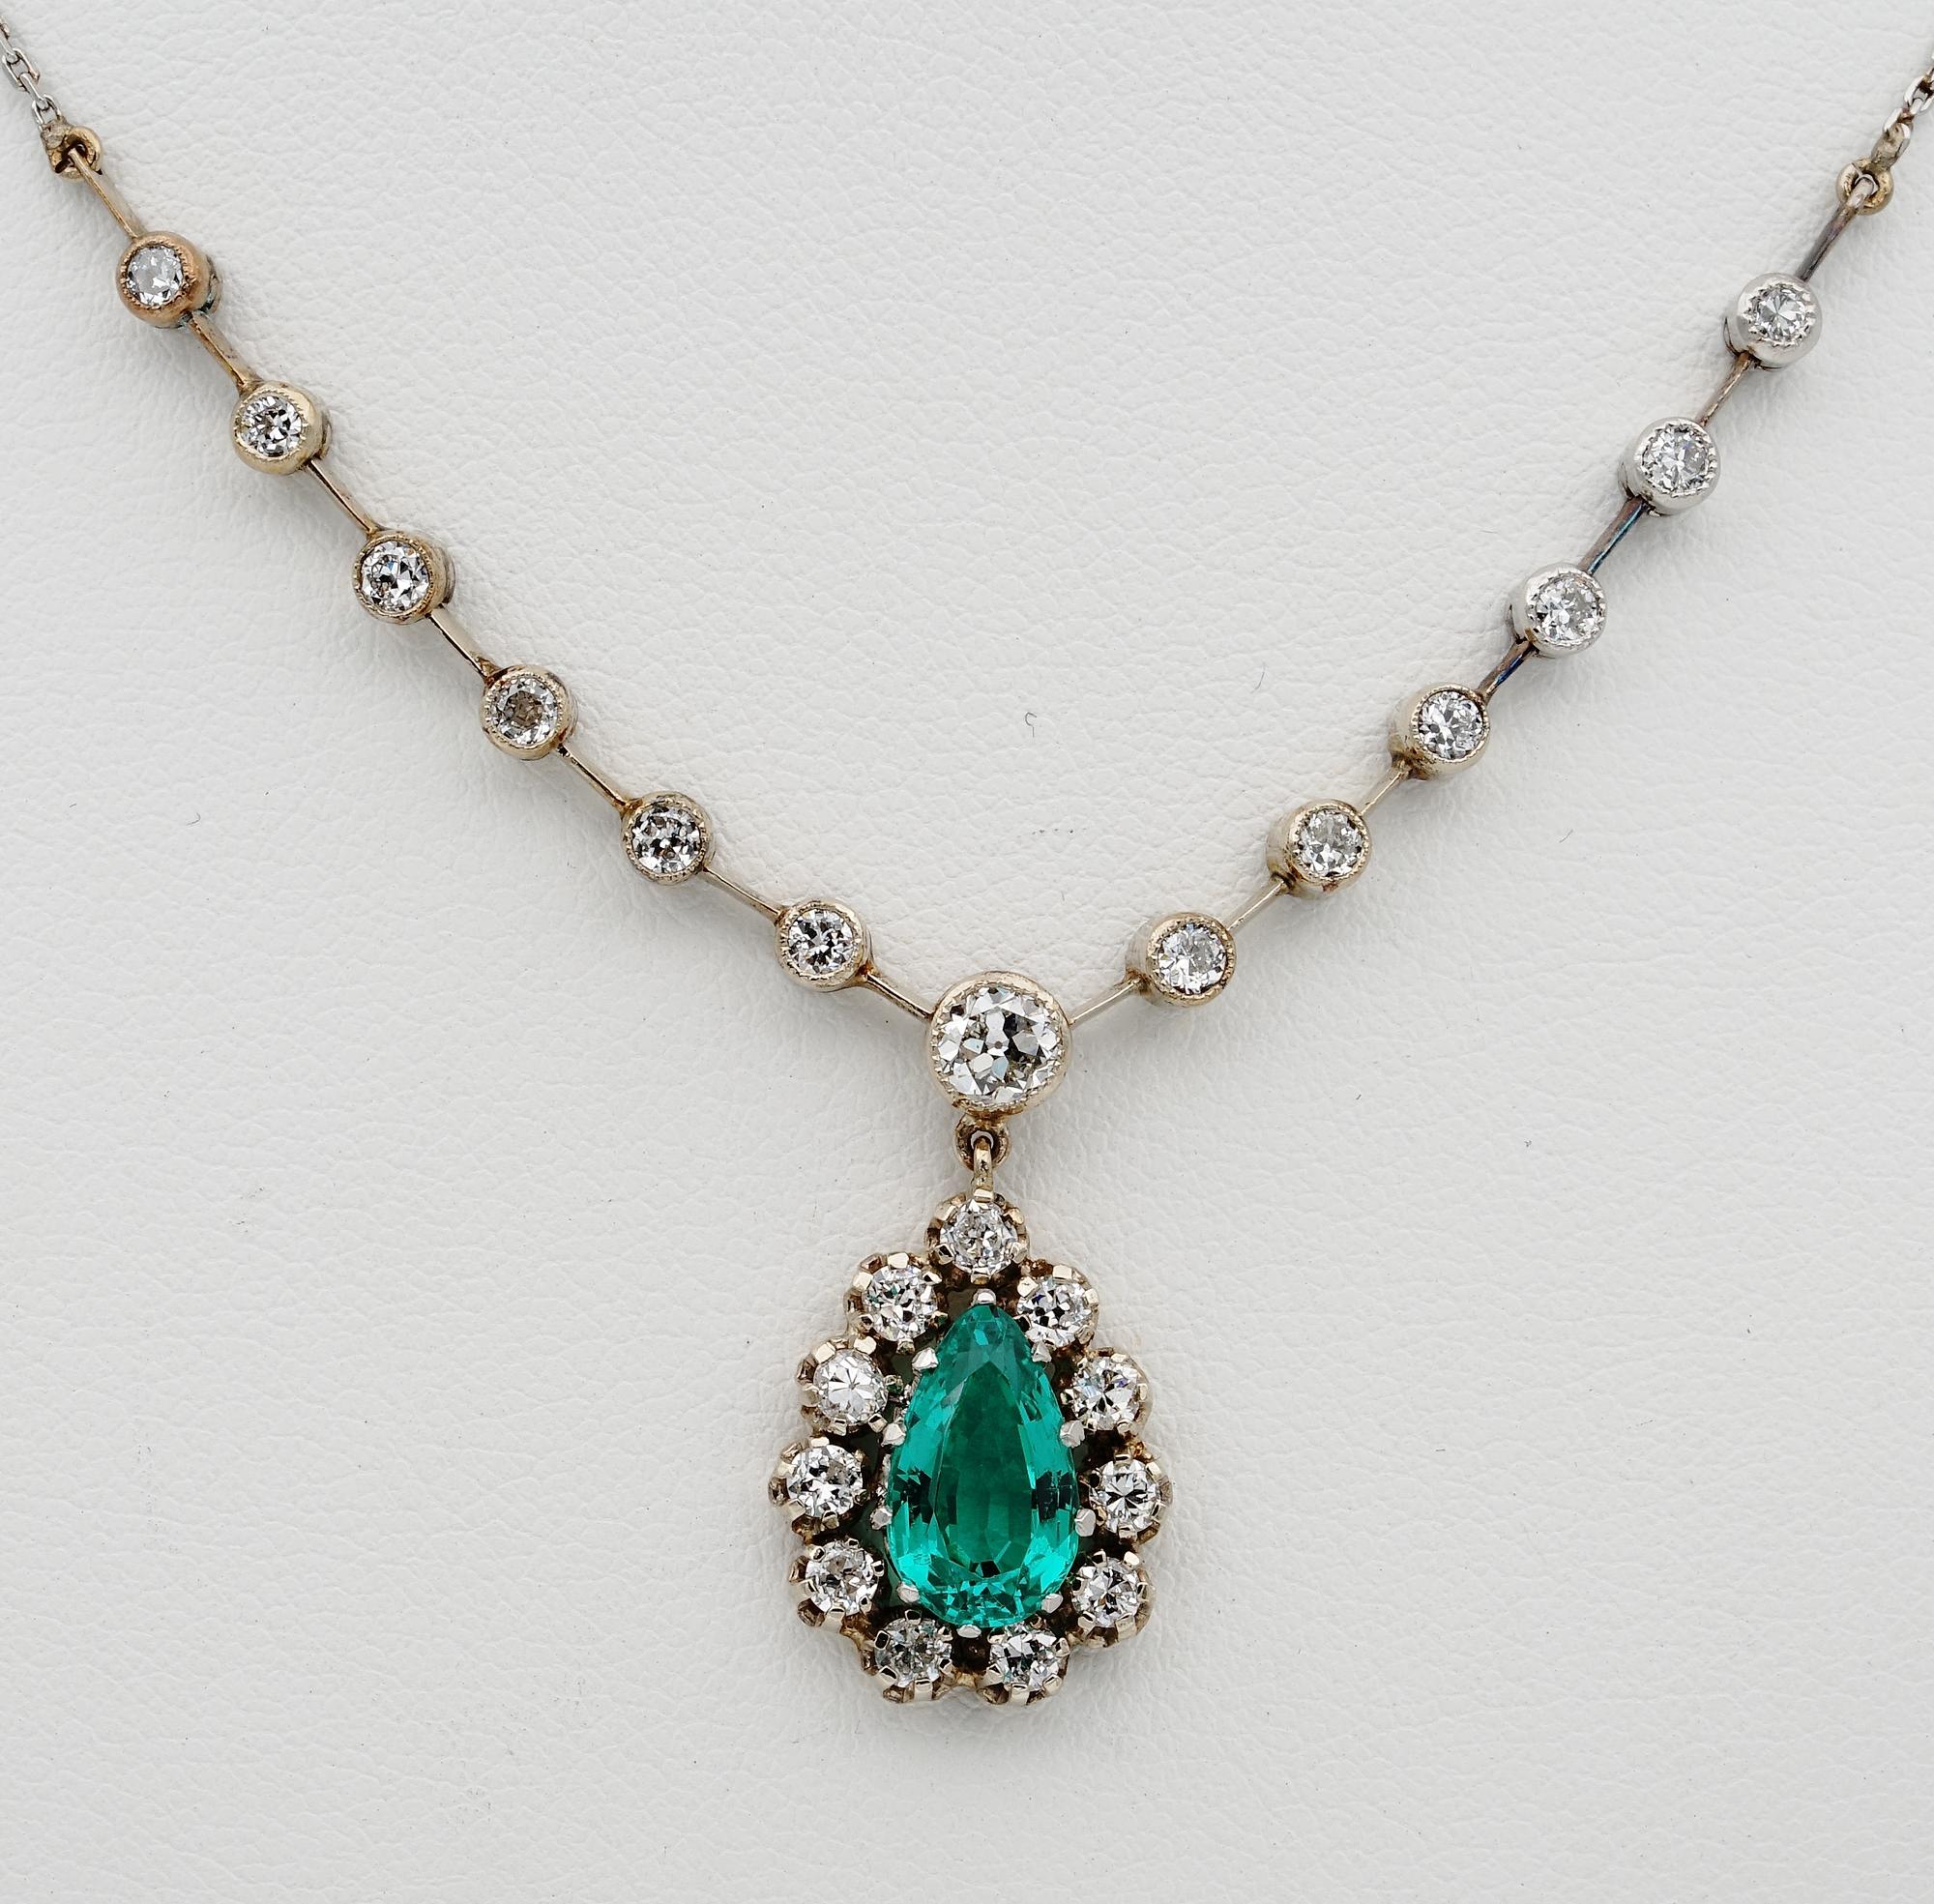 Magnificent in quality!

Extraordinary Emerald quality as rarely seen on this sweet Edwardian necklace making an exceptional focal point for its beauty
Beginning of the last century a Belle Epoque treasure prizing endless charm and delicacy of the